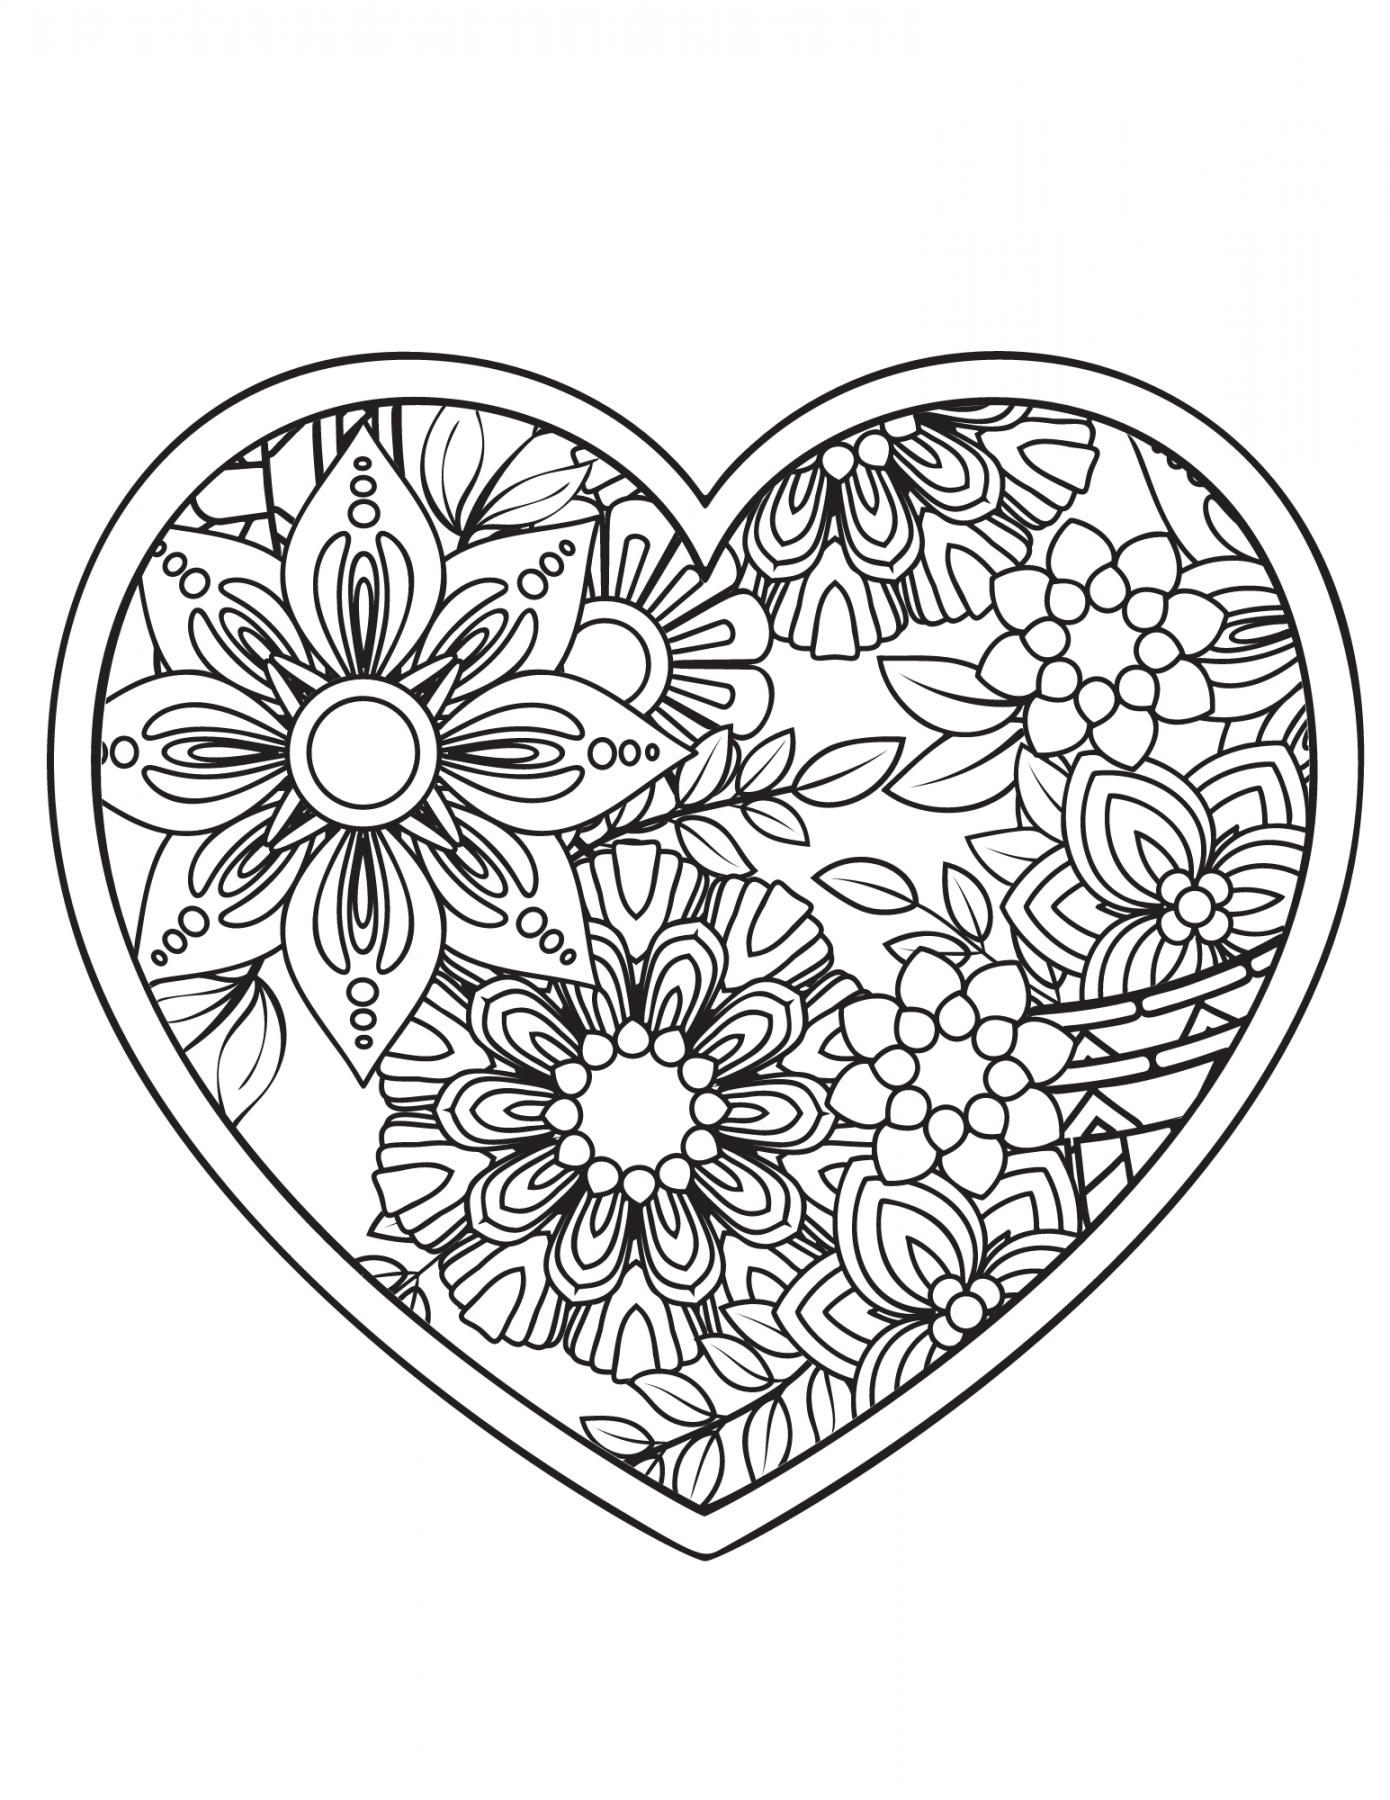 Free Printable Heart Coloring Pages for Kids and Adults - FREE Printables - Free Printable Hearts Coloring Pages